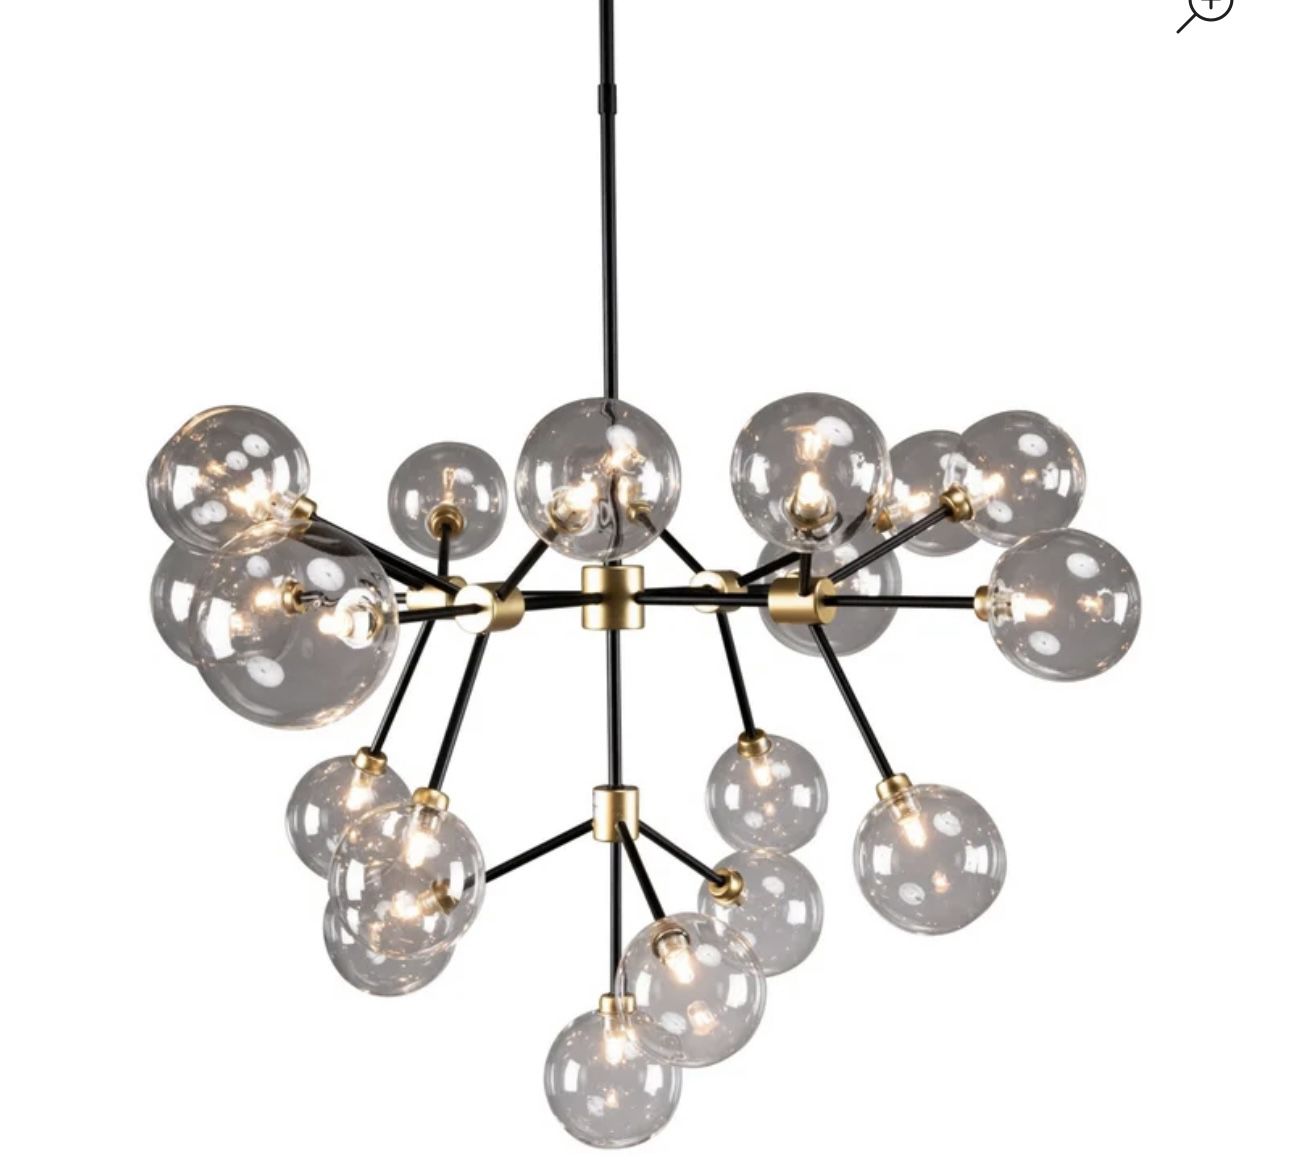 Benjara 20 - Light Sputnik Chandelier in black and gold; quality checked; new open box inspected: 32'' H X 39'' W X 39'' D MSRP $1270. Our price $720 